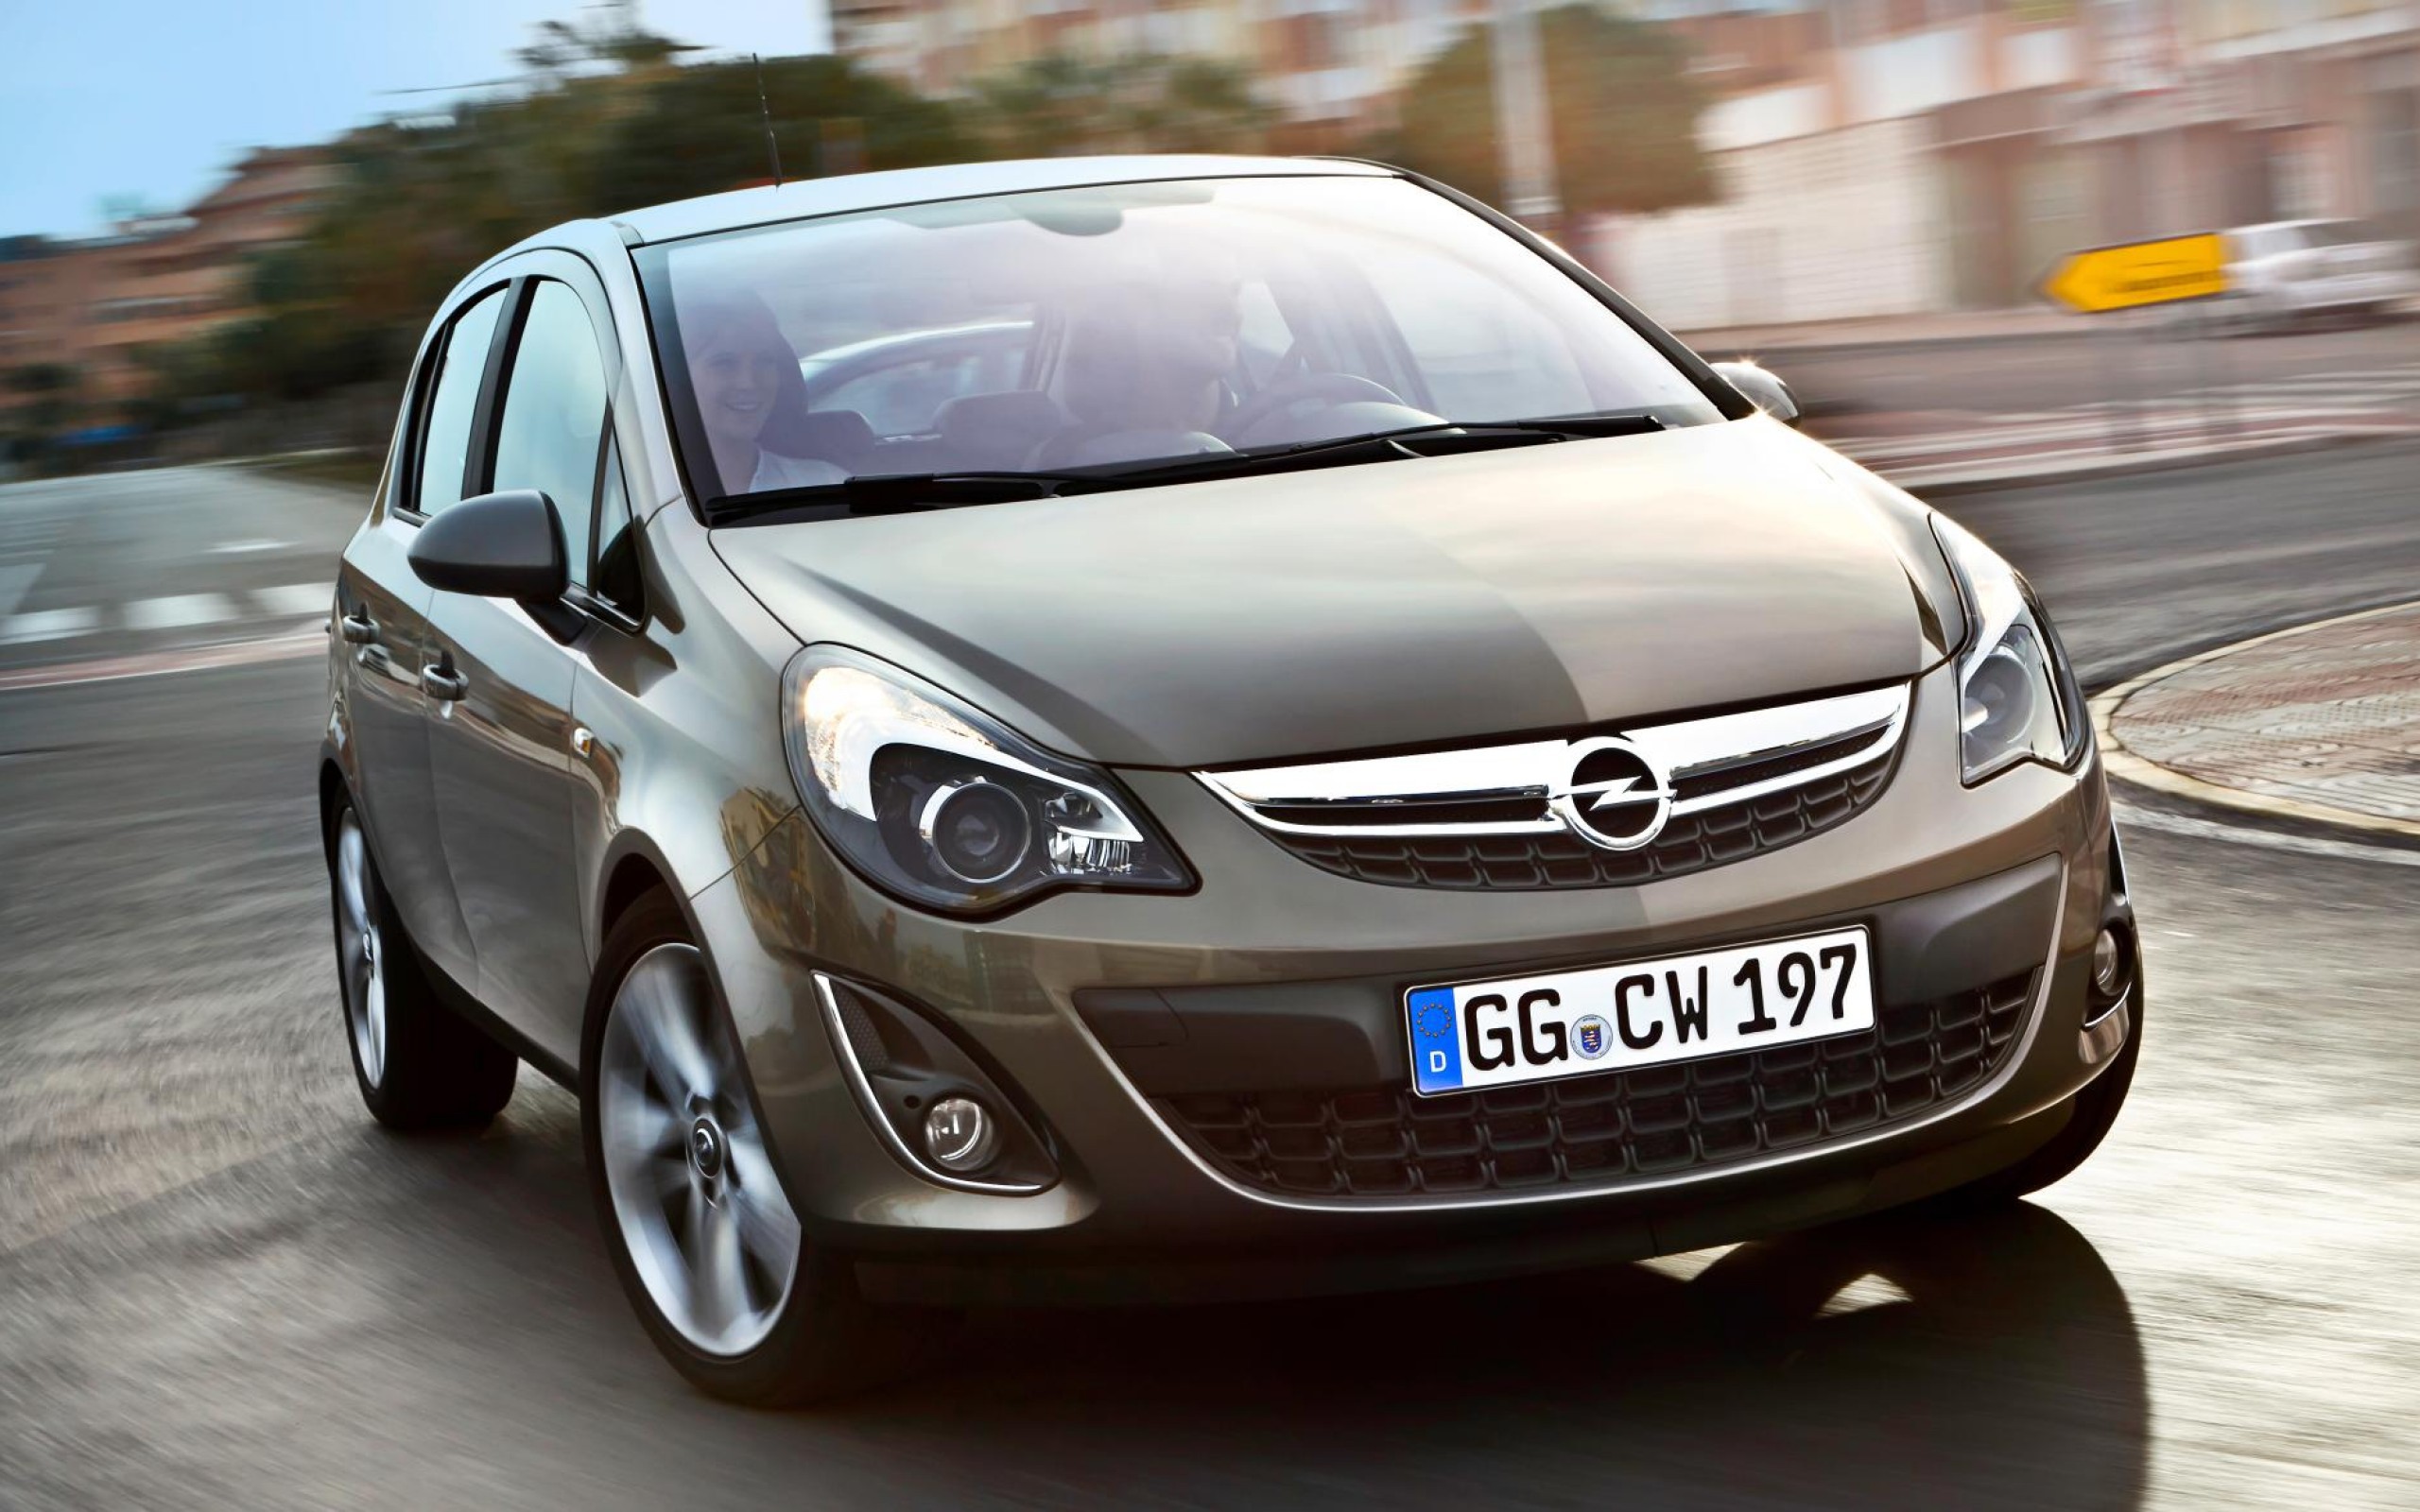 Test drive the car Opel Corsa wallpapers and images ...